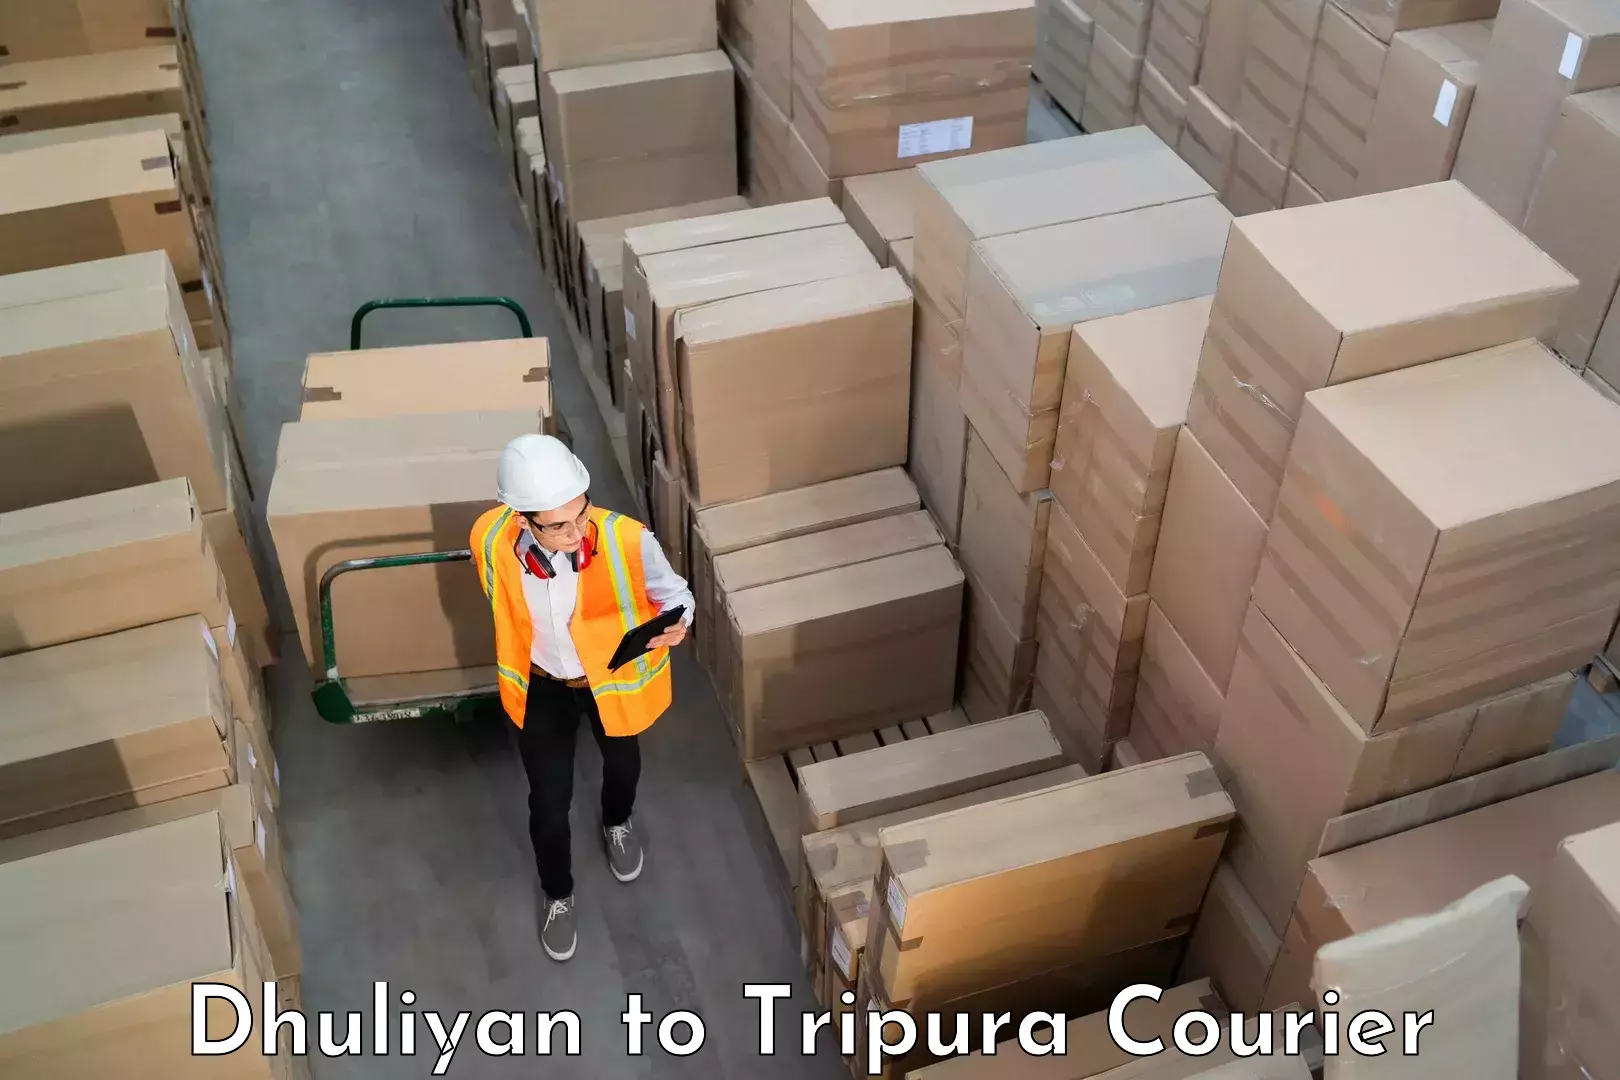 Instant baggage transport quote in Dhuliyan to Udaipur Tripura